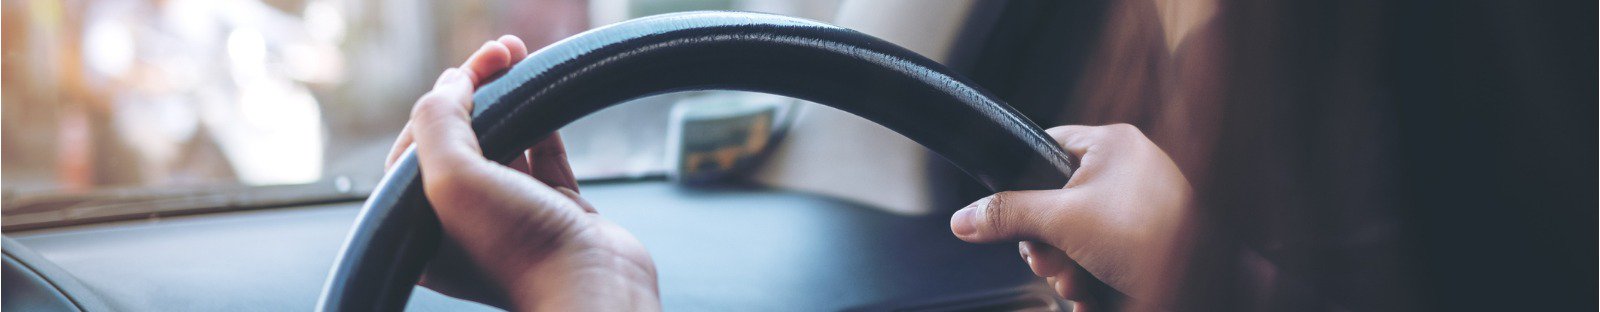 Close up of hands holding a car steering wheel